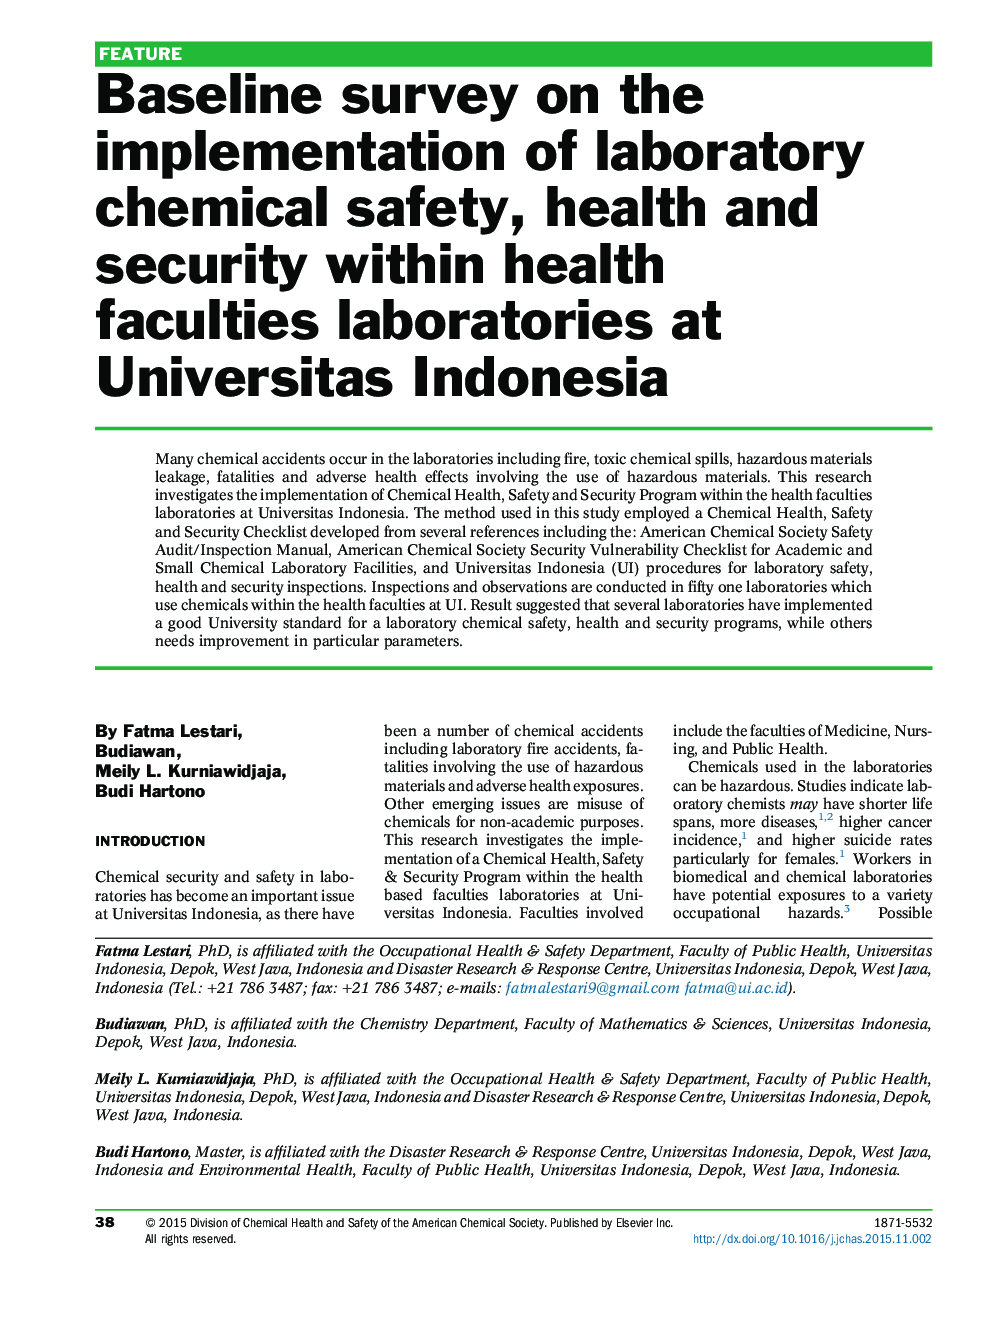 Baseline survey on the implementation of laboratory chemical safety, health and security within health faculties laboratories at Universitas Indonesia